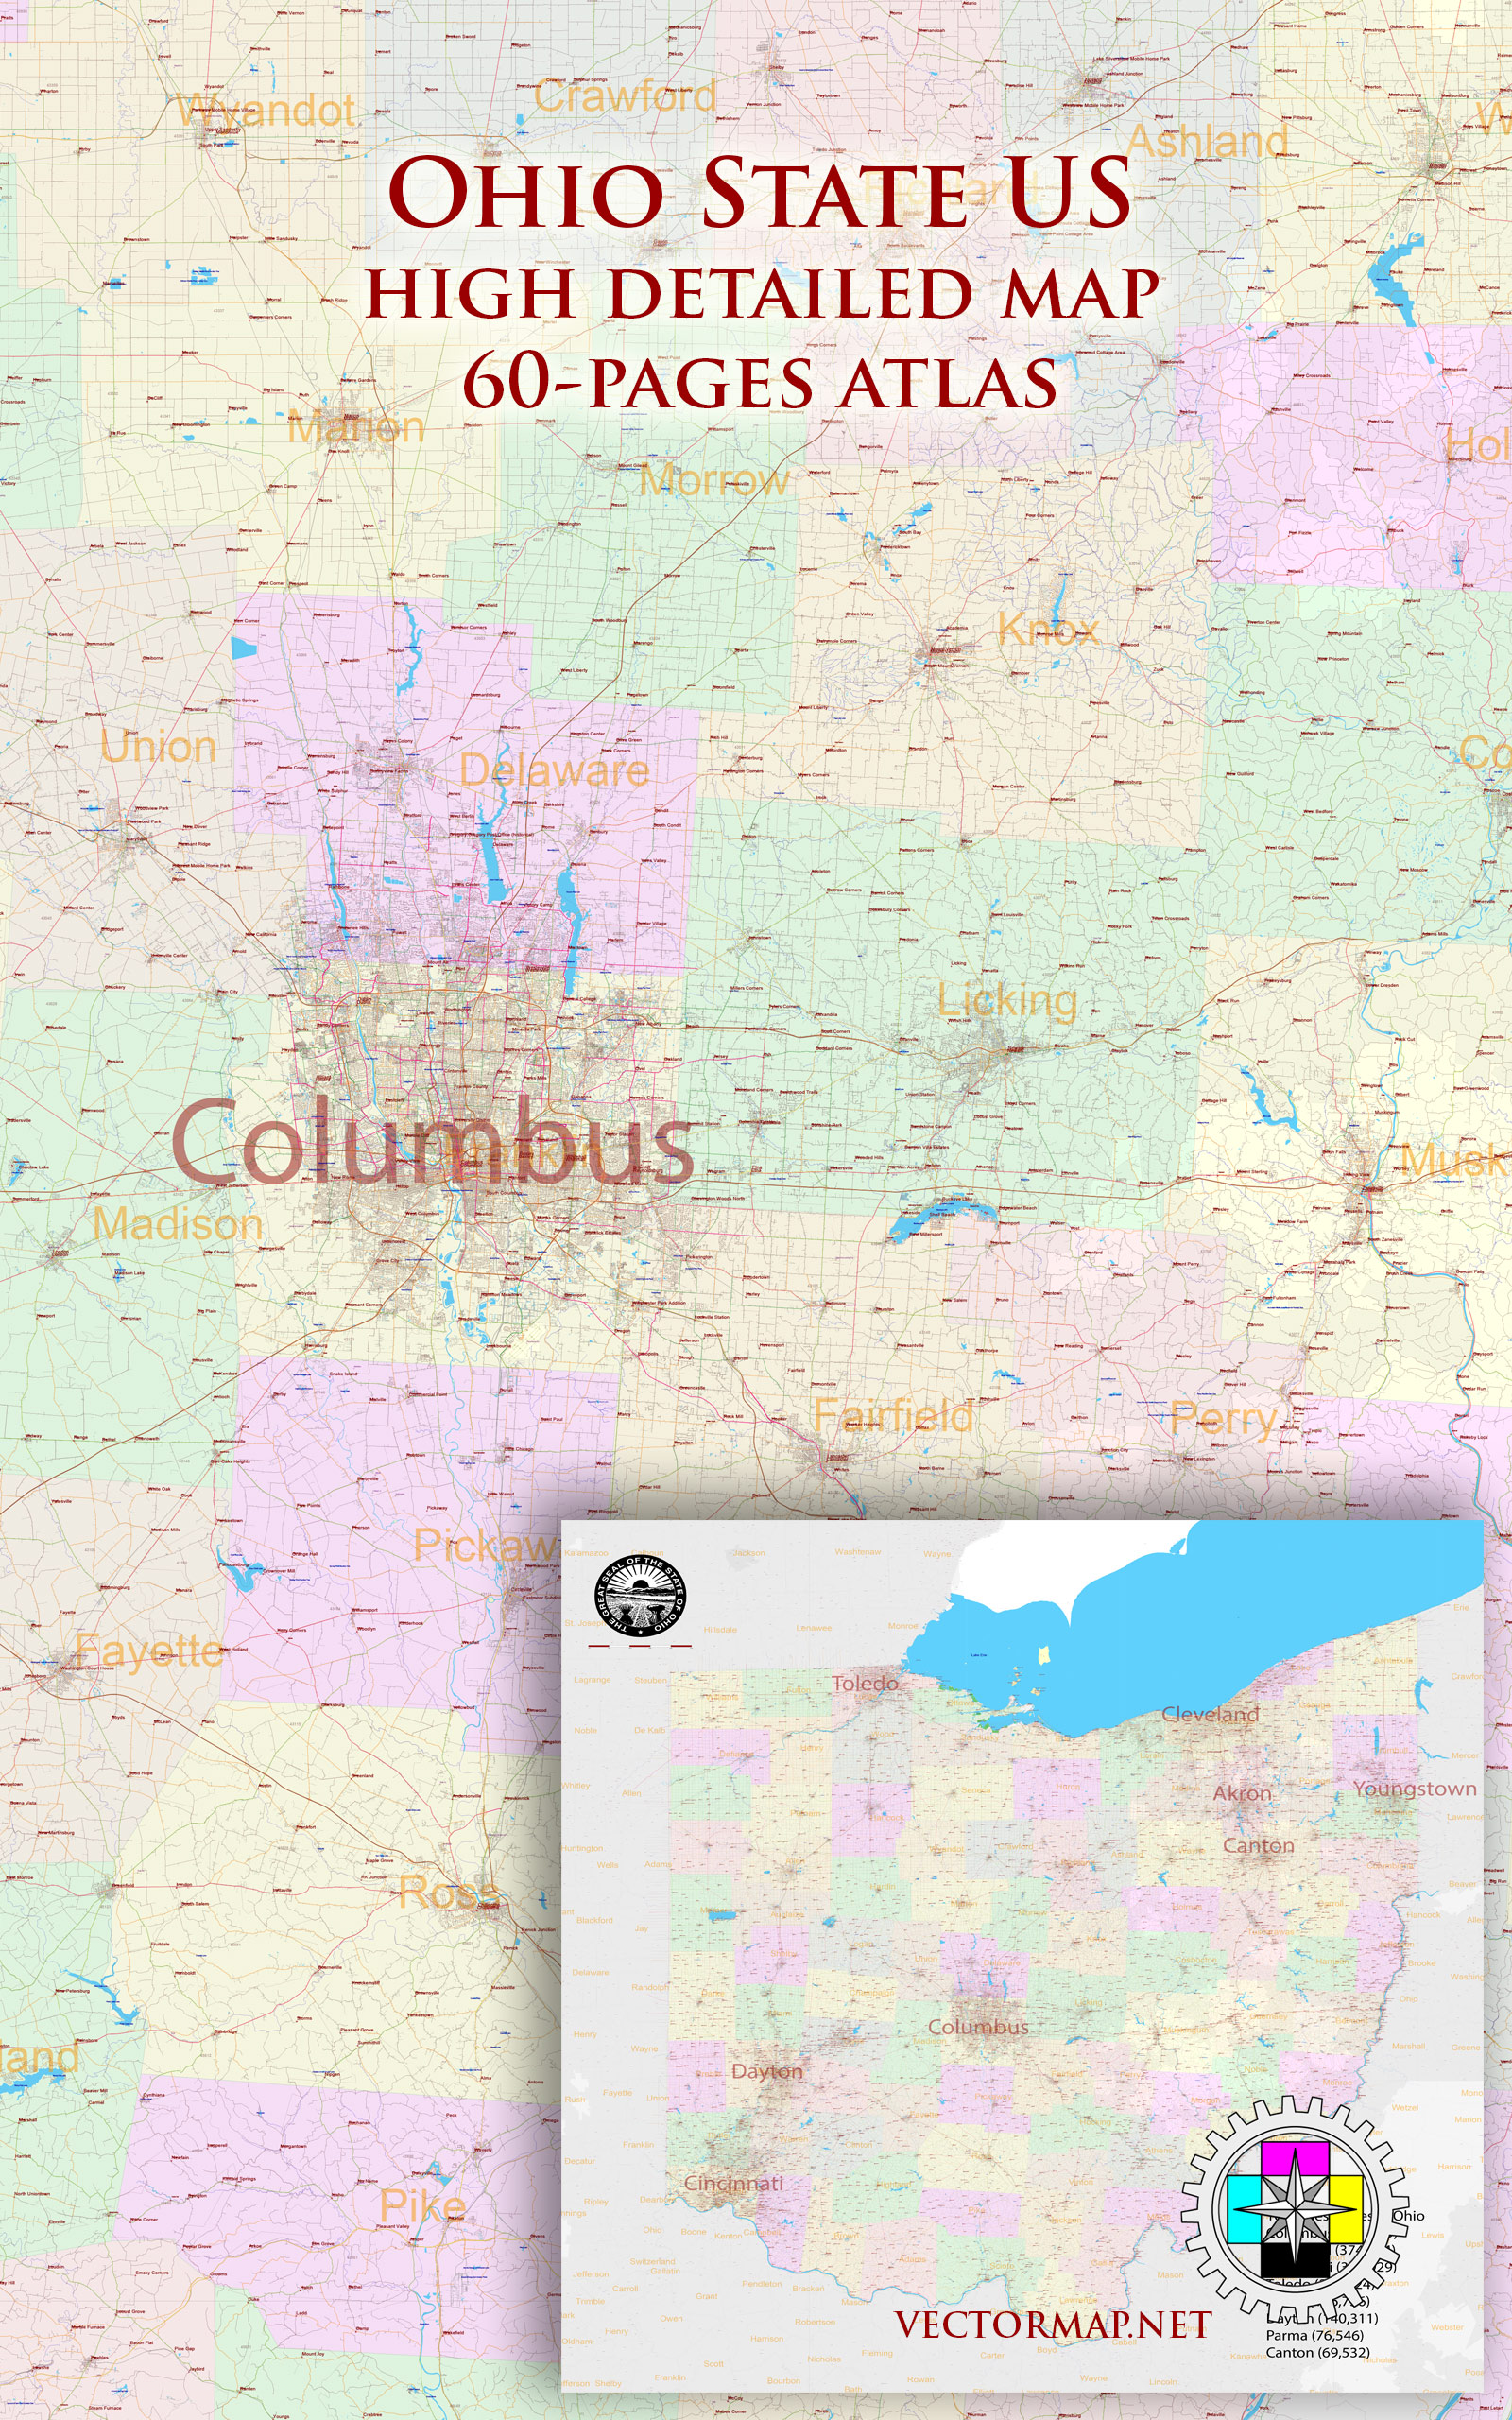 Ohio State US Tourist Road Map multi-page atlas, contains 60 pages vector PDF